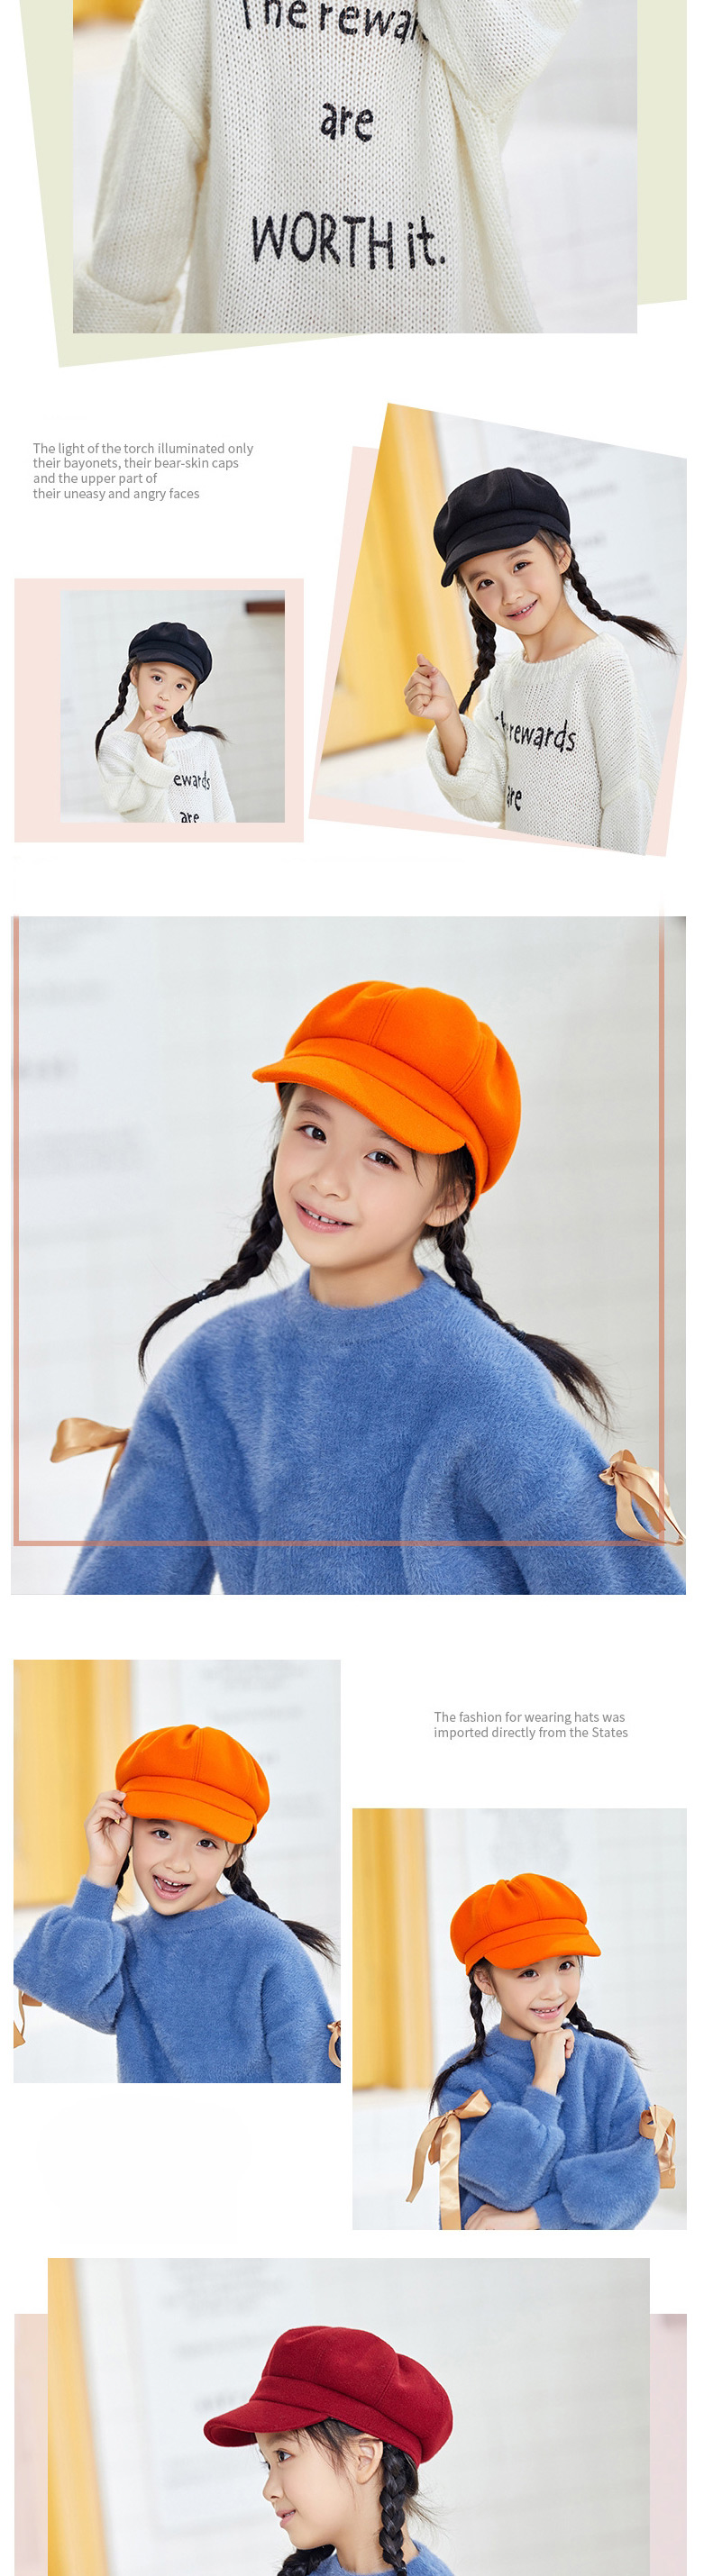 Fashion Adult Caramel Woolen Solid Color Stitching Parent-child Octagonal Beret,Knitting Wool Hats